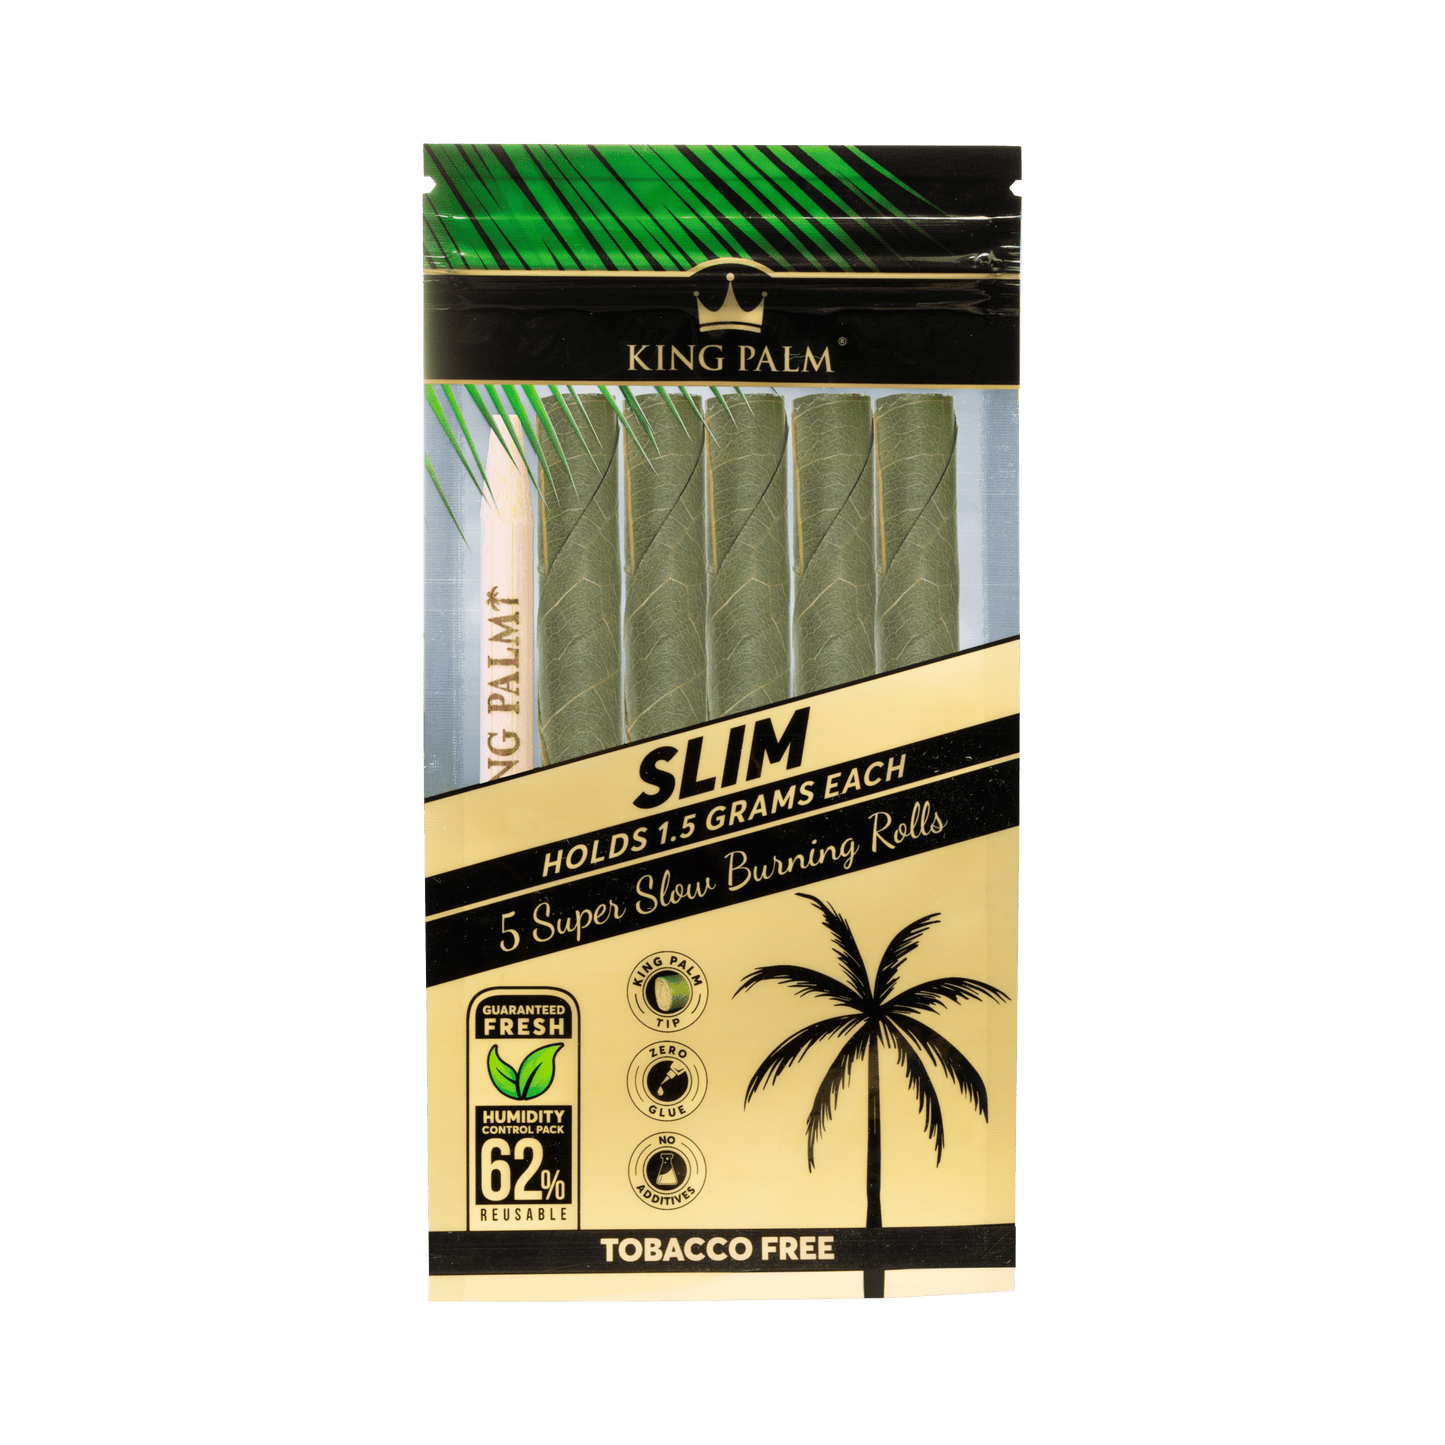 King Palm - Natural Rolls, Slims (1.5g)